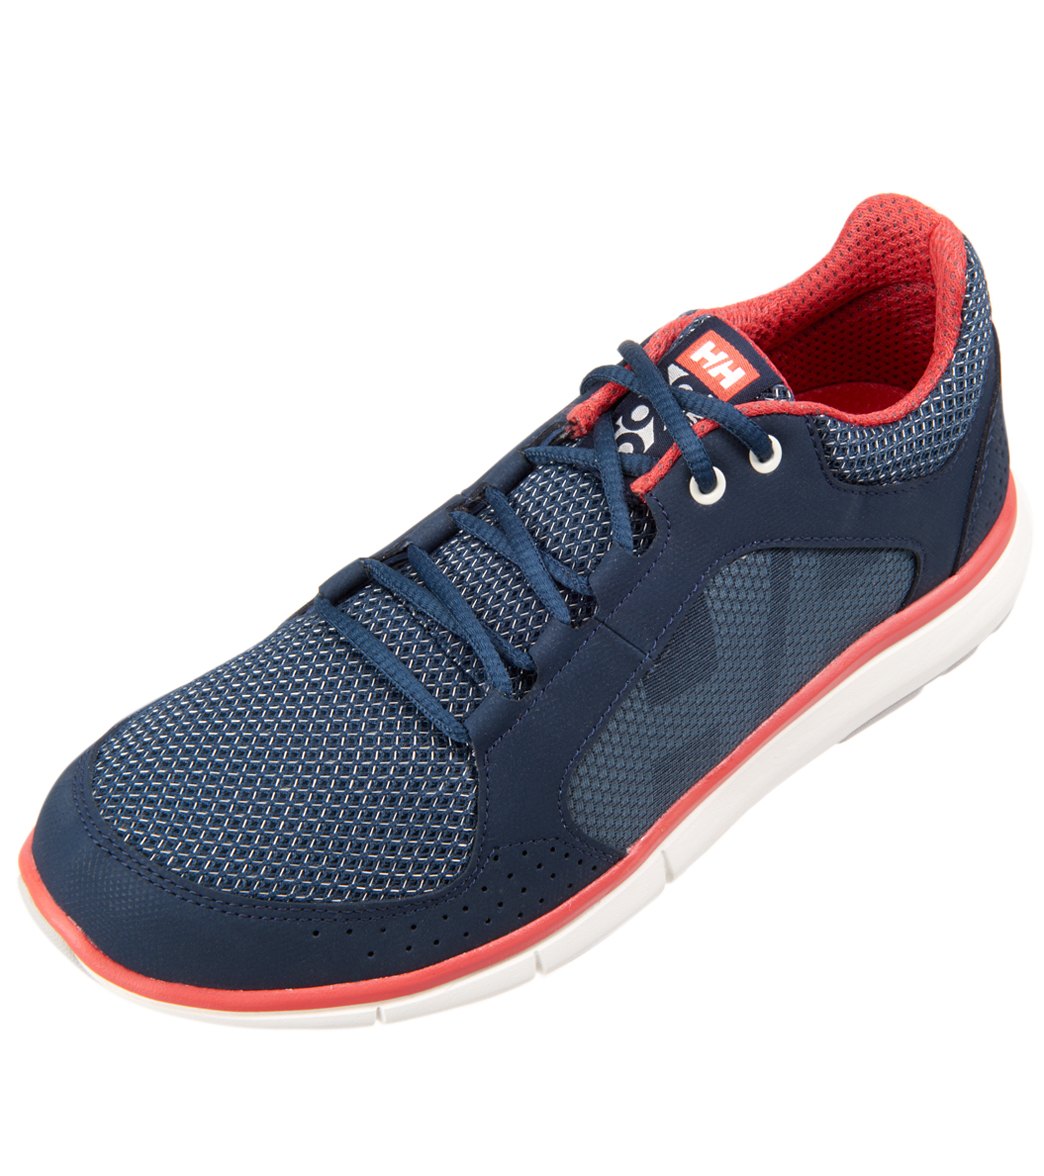 Helly Hansen Women's Ahiga V3 Hydropower Water Shoe at SwimOutlet.com ...